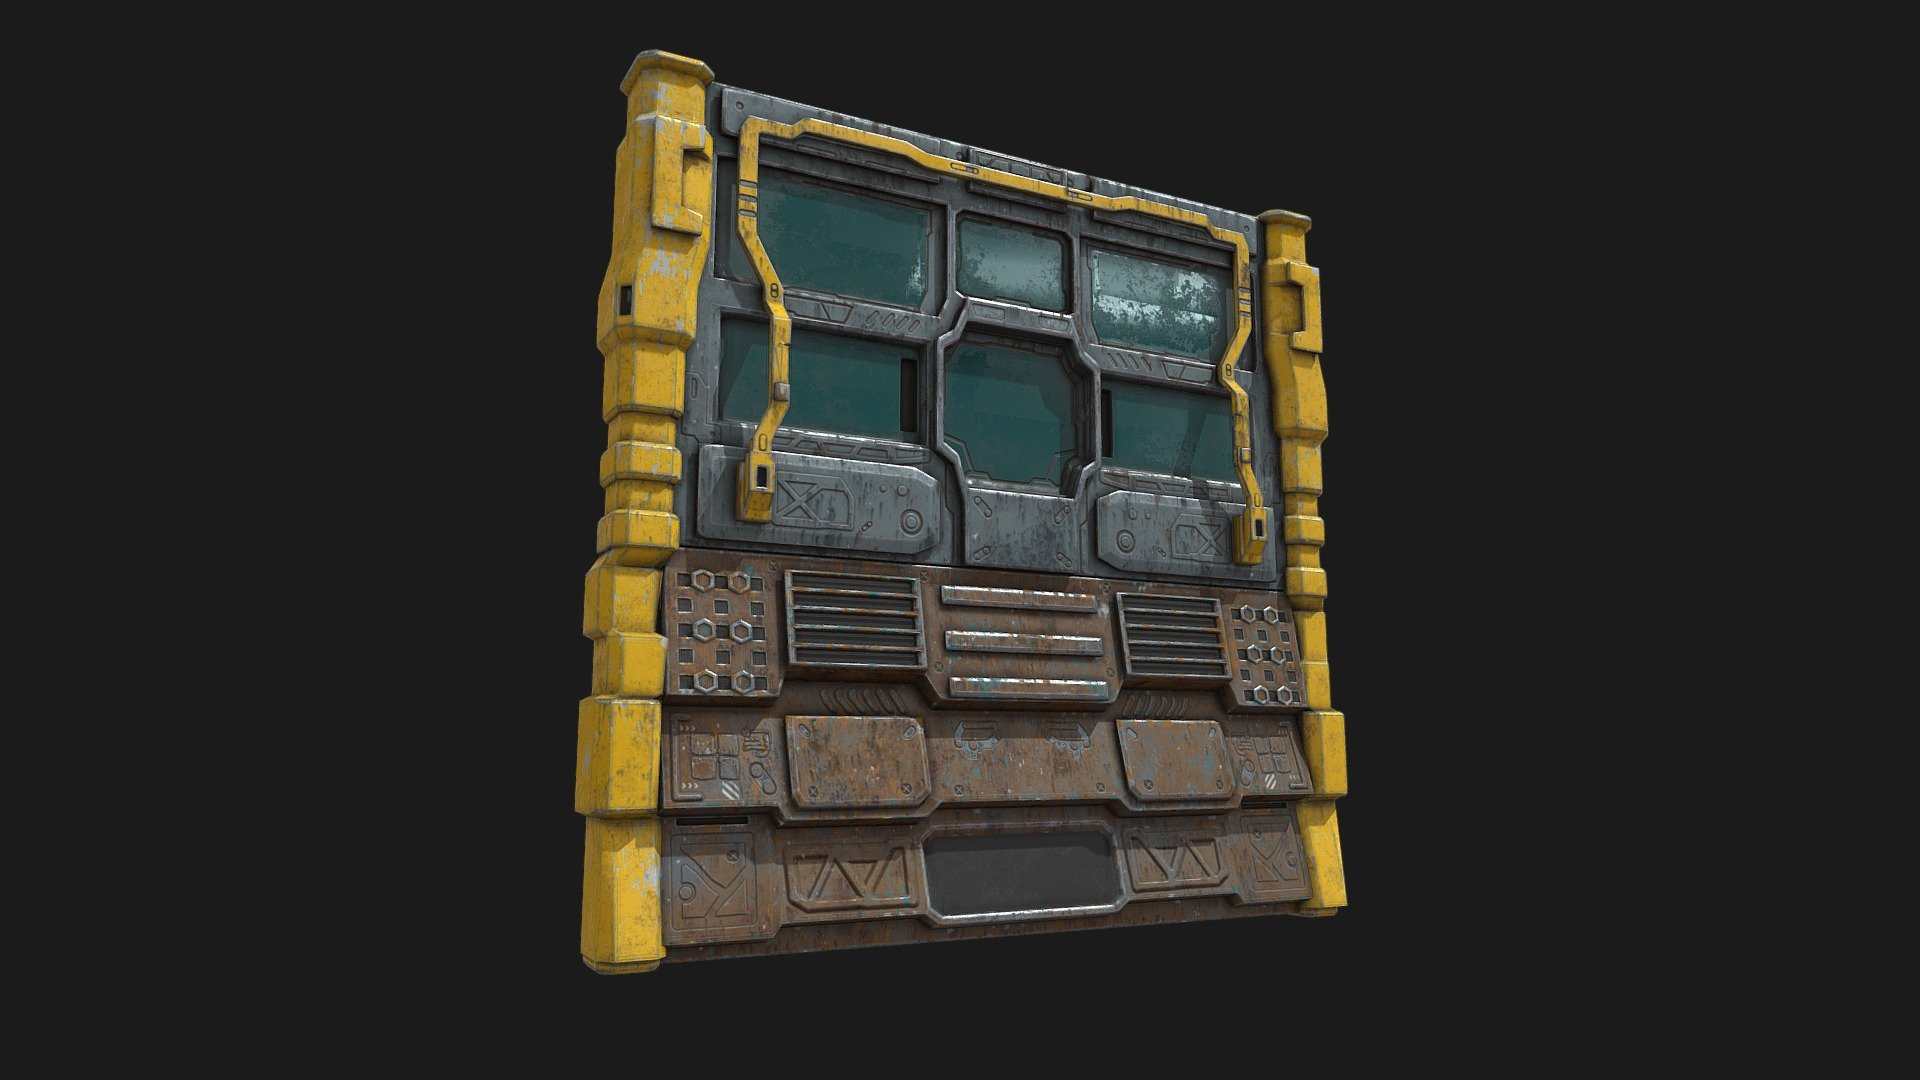 File formats - fbx, obj

Ready for games and other real time applications

PBR textures - 4096x4096

Base color map,

Normal map,

Roughness map,

Metallic map ,

Ambient Occlusion map,

Also included Substance painter texture maps presets for:

Unreal Engine 4,

Unity  (Standart Metallic) 3d model